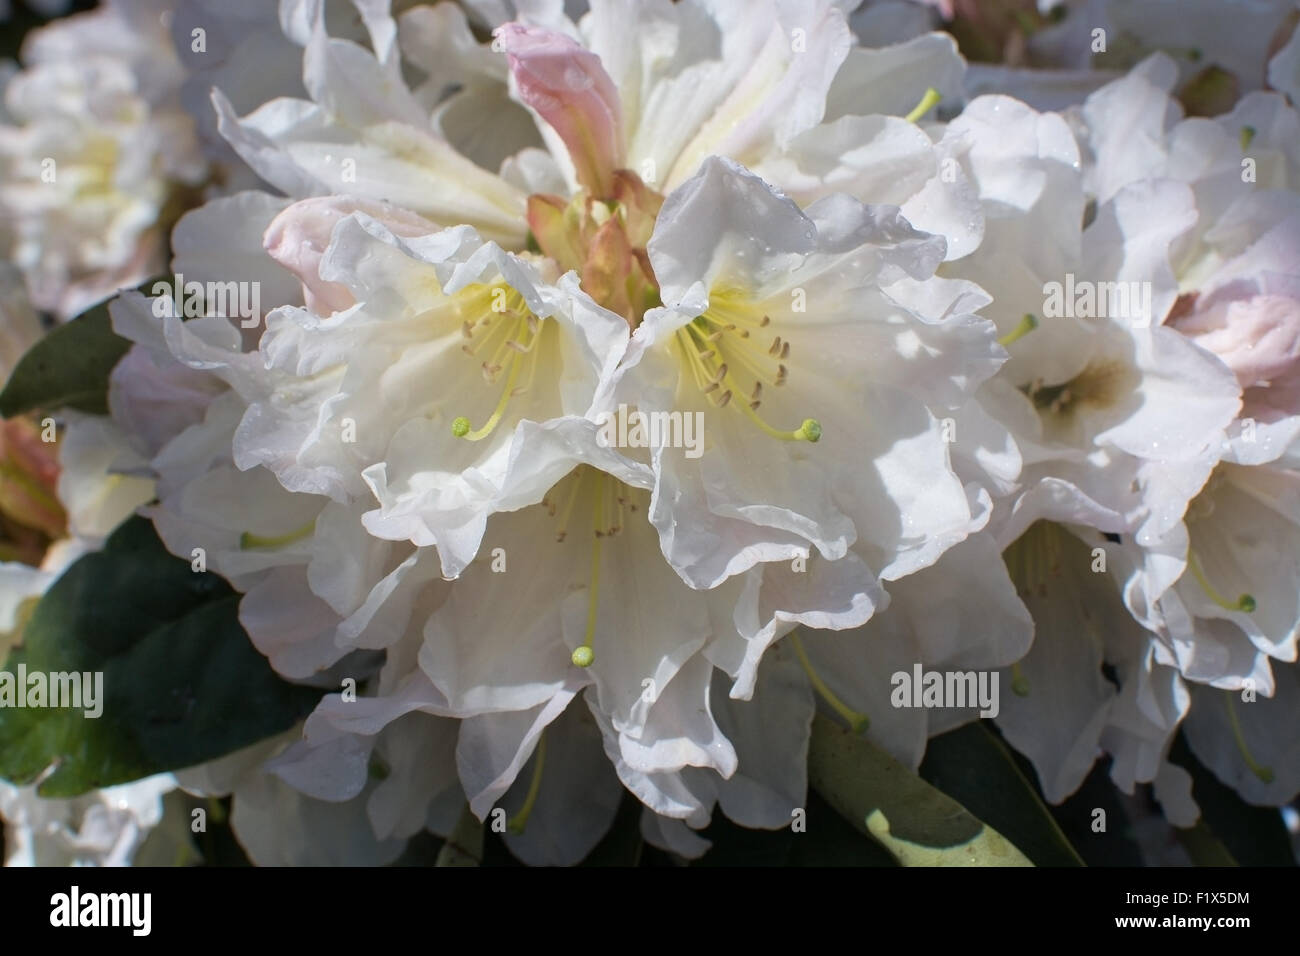 White rhododendron flower closeup with petals and pistils in May. Stock Photo